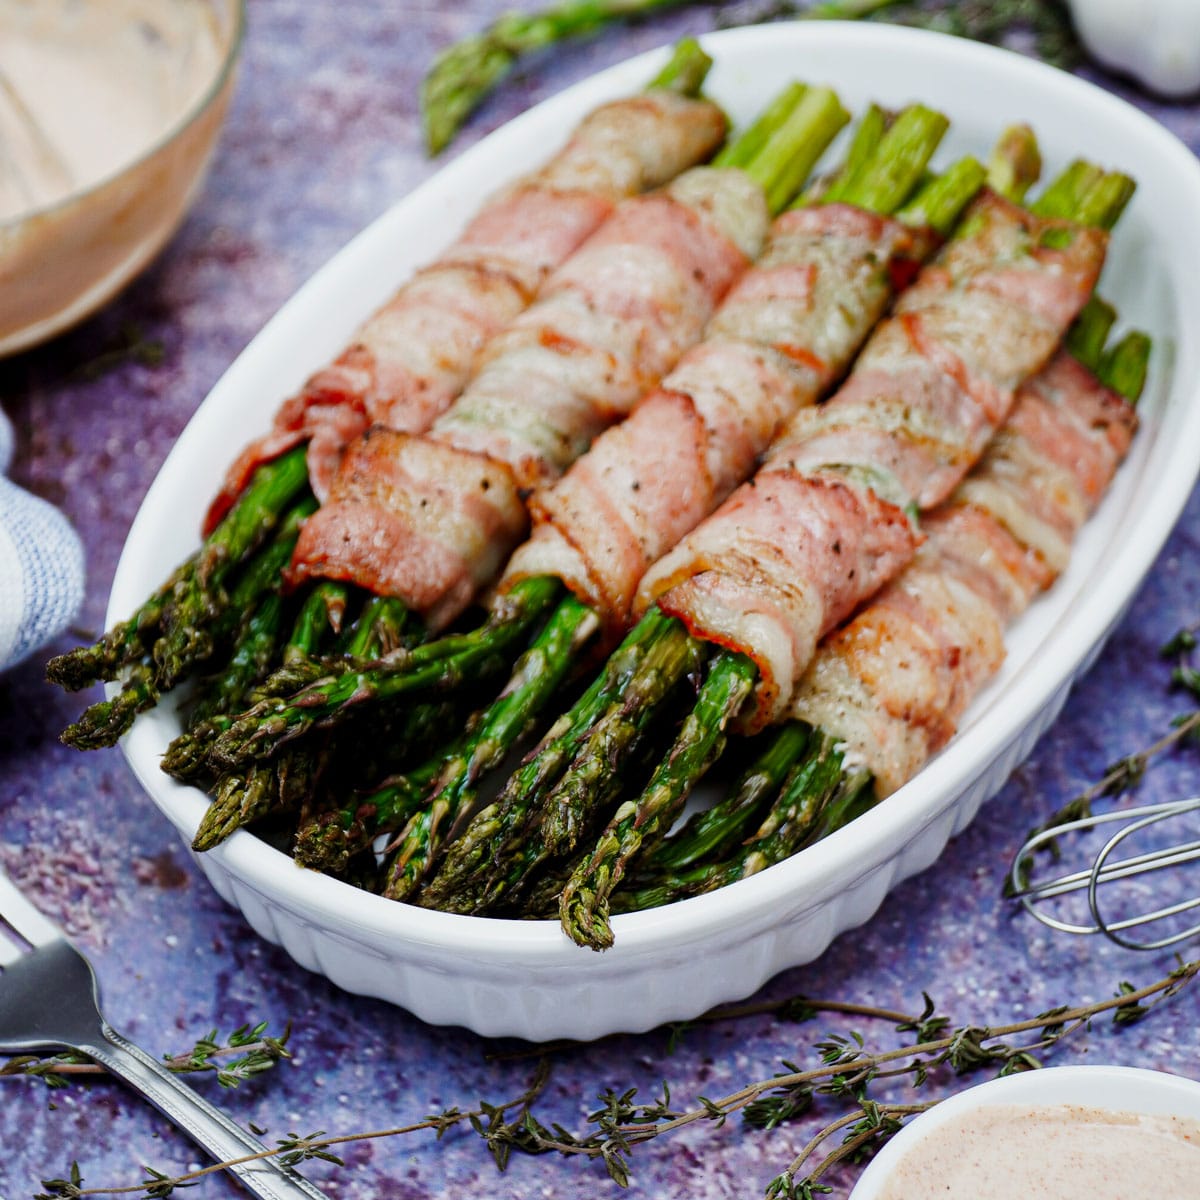 Air fried bacon wrapped asparagus served on a medium-sized baking dish, with yogurt dipping sauce.